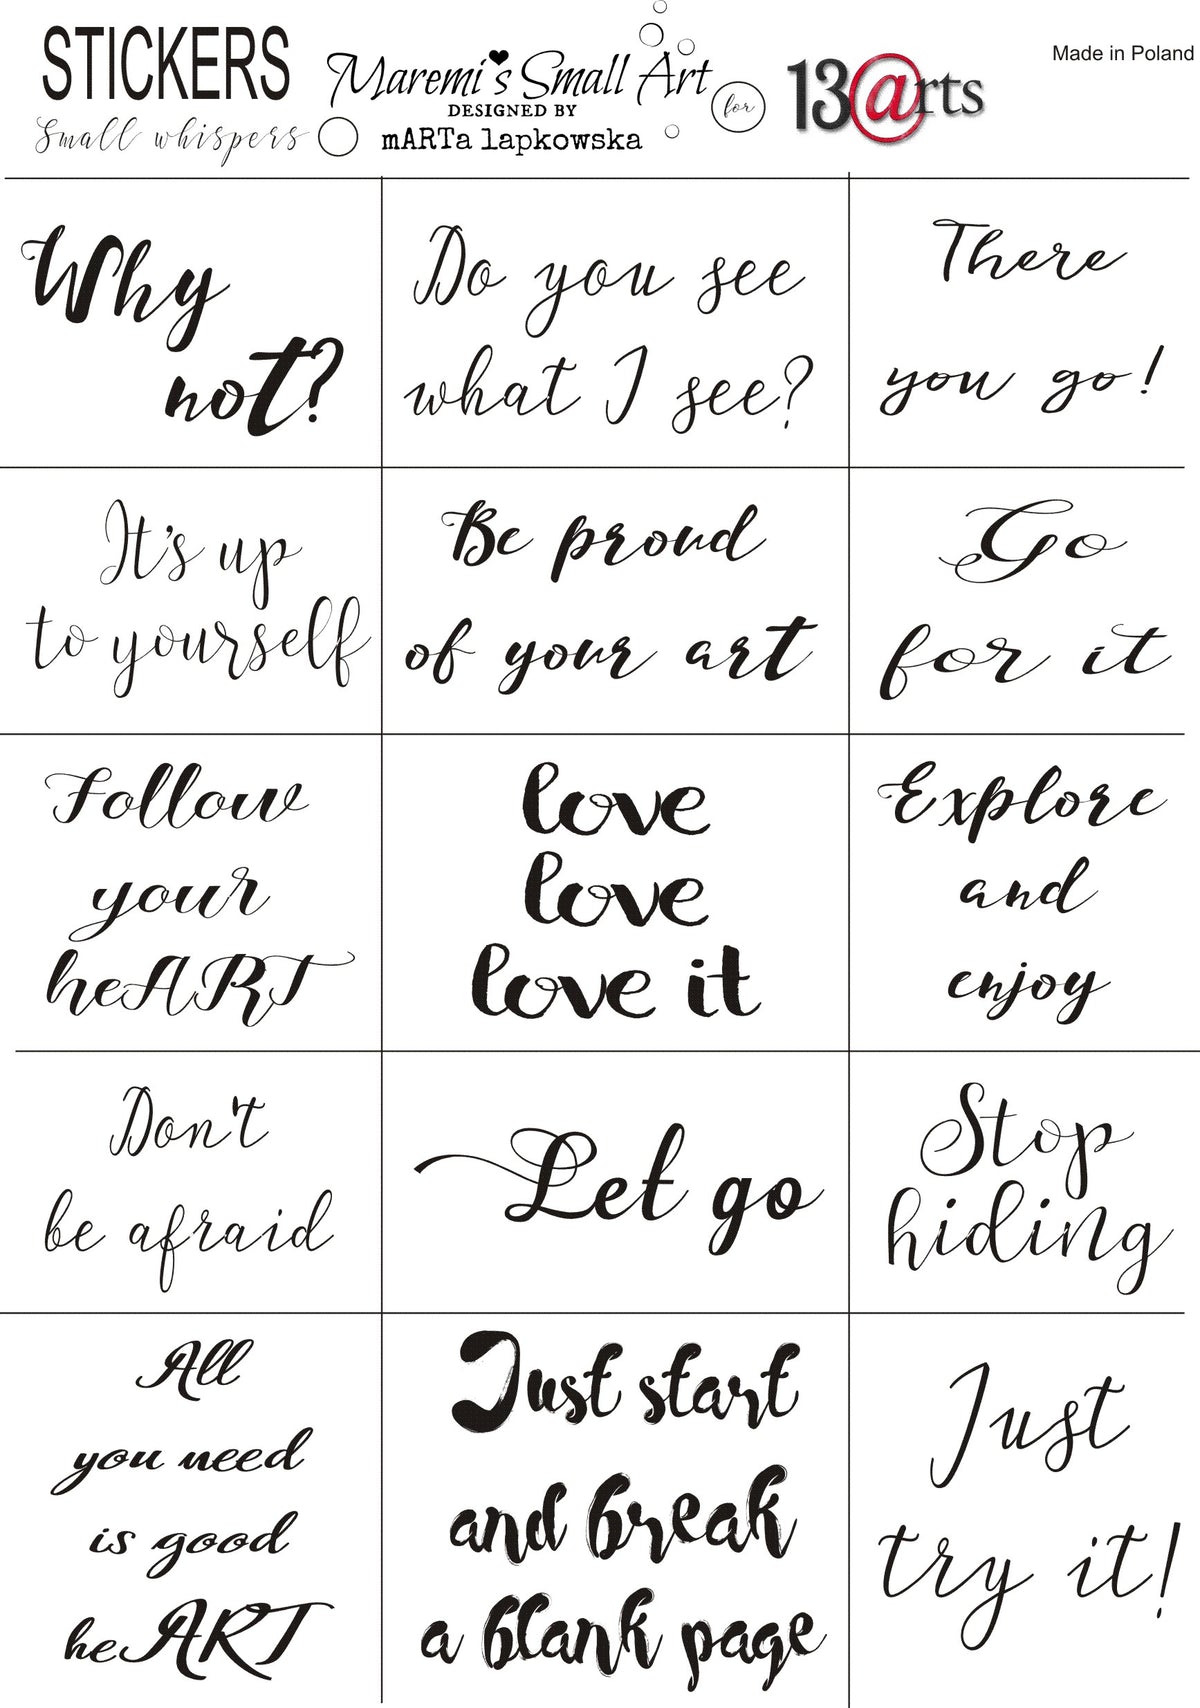 A5 New Transparent Stickers - Set of 9 Maremi's Words, Sayings – Maremi  Small Art